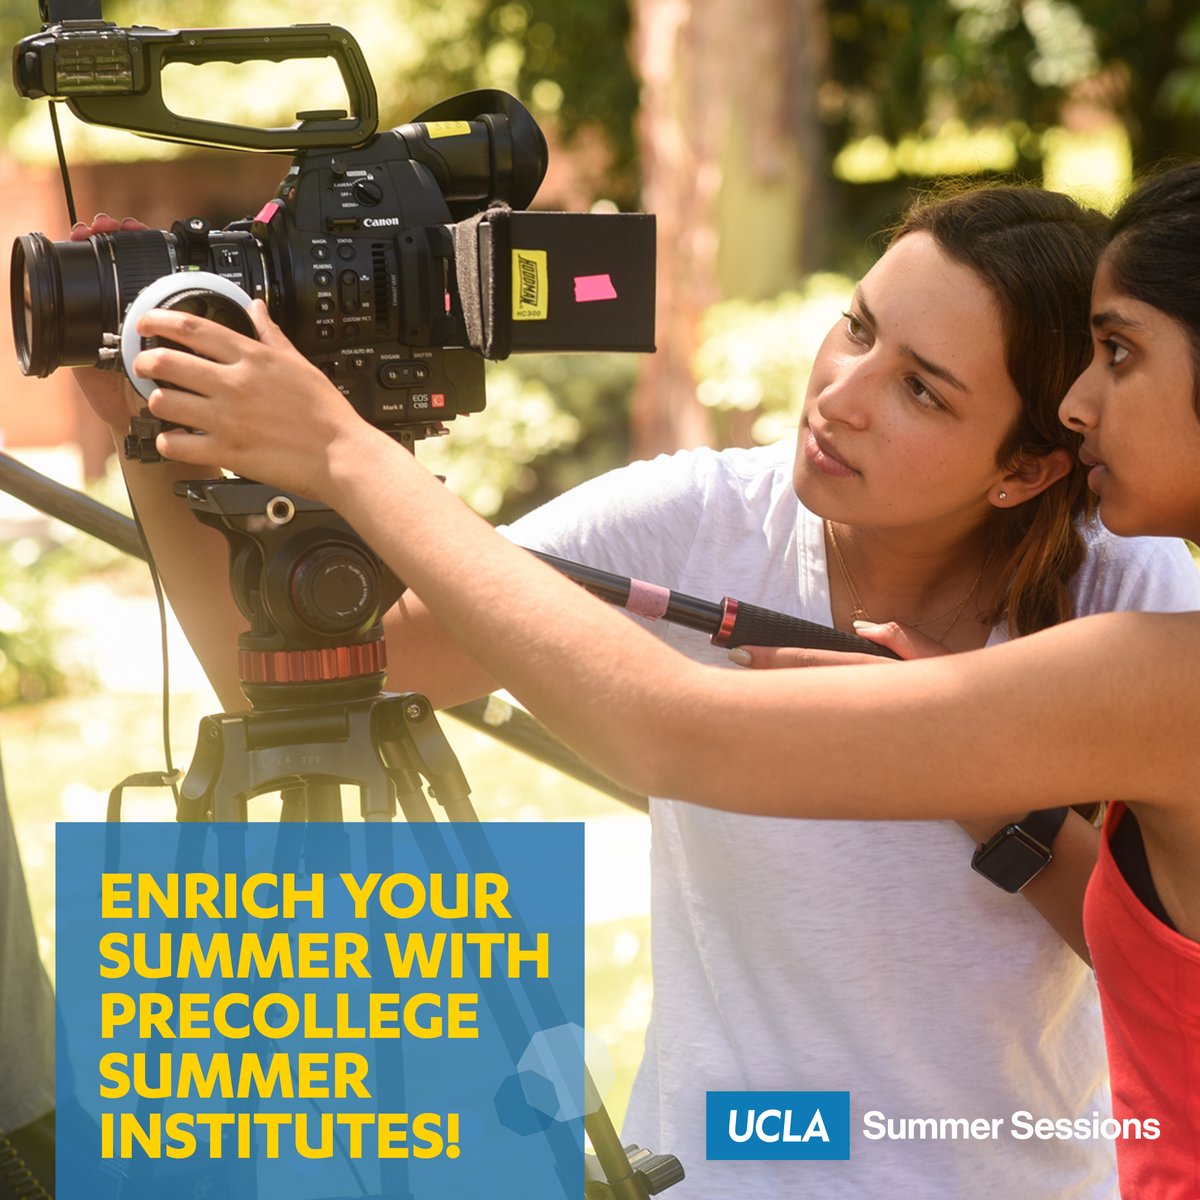 Attention high schoolers! Take immersive courses in musical theater, investments, generative AI, and more with UCLA's official academic offering, Precollege Summer Institutes! Earn college credit and experience life at the country’s #1 public university. summer.ucla.edu